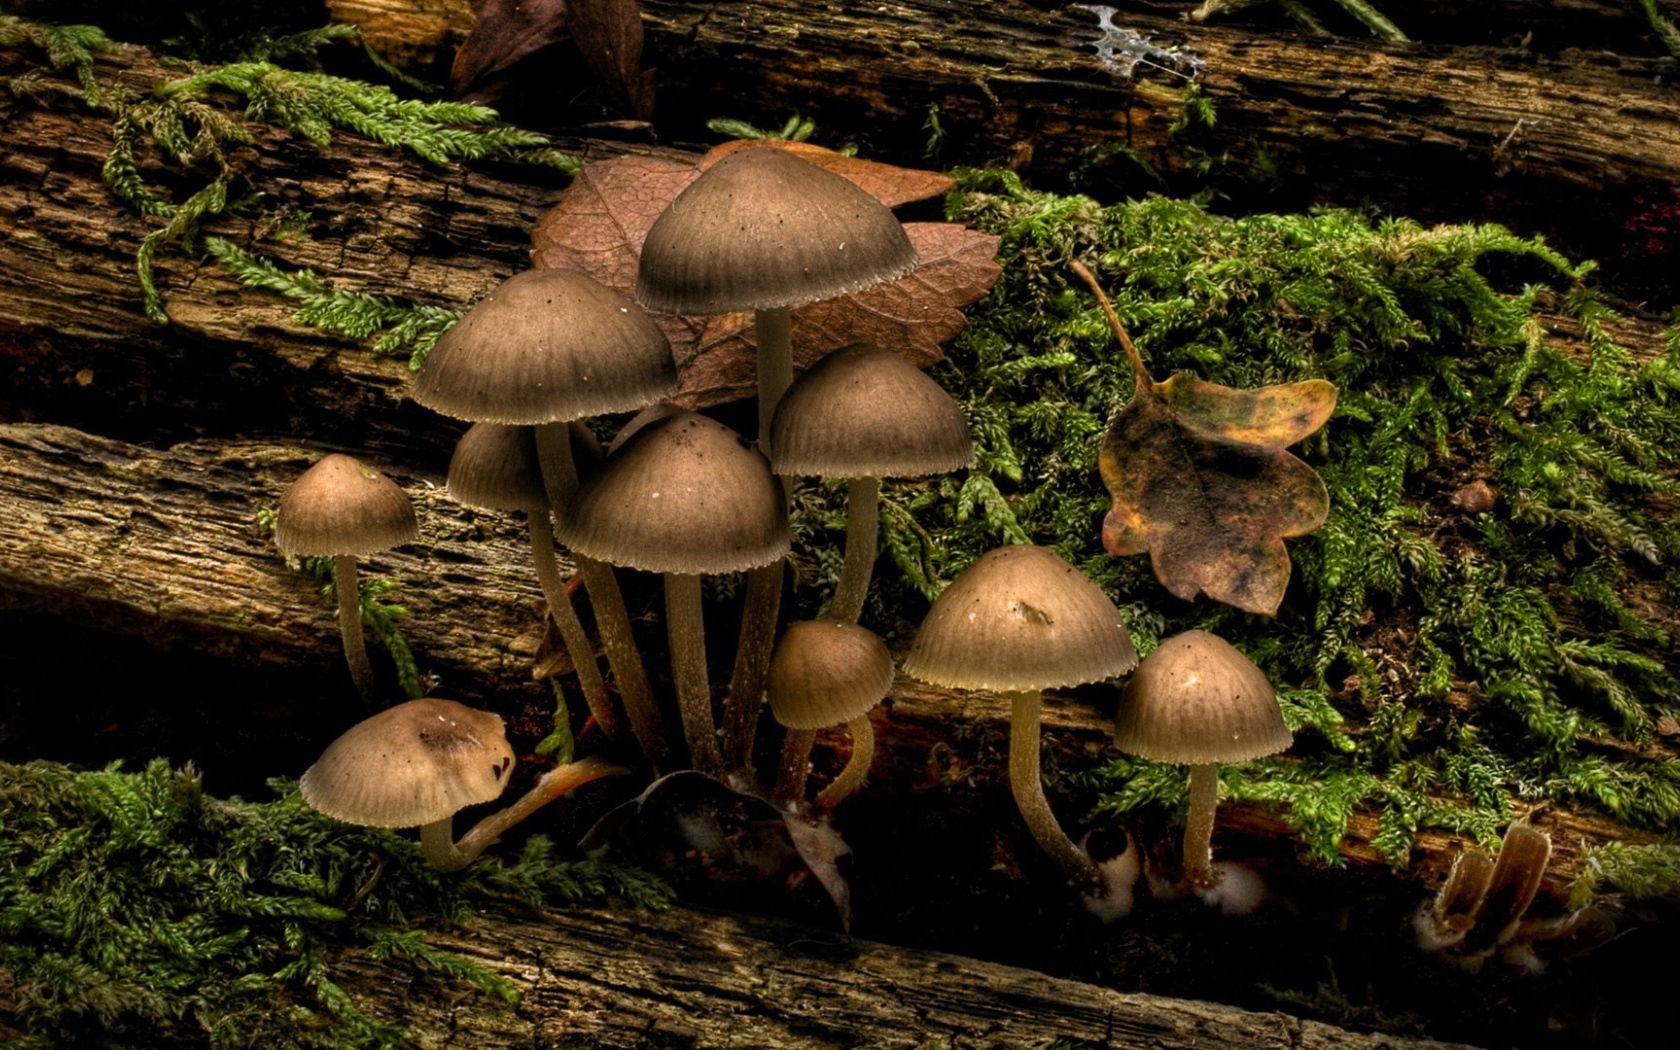 Mushrooms and moss on a tree trunk